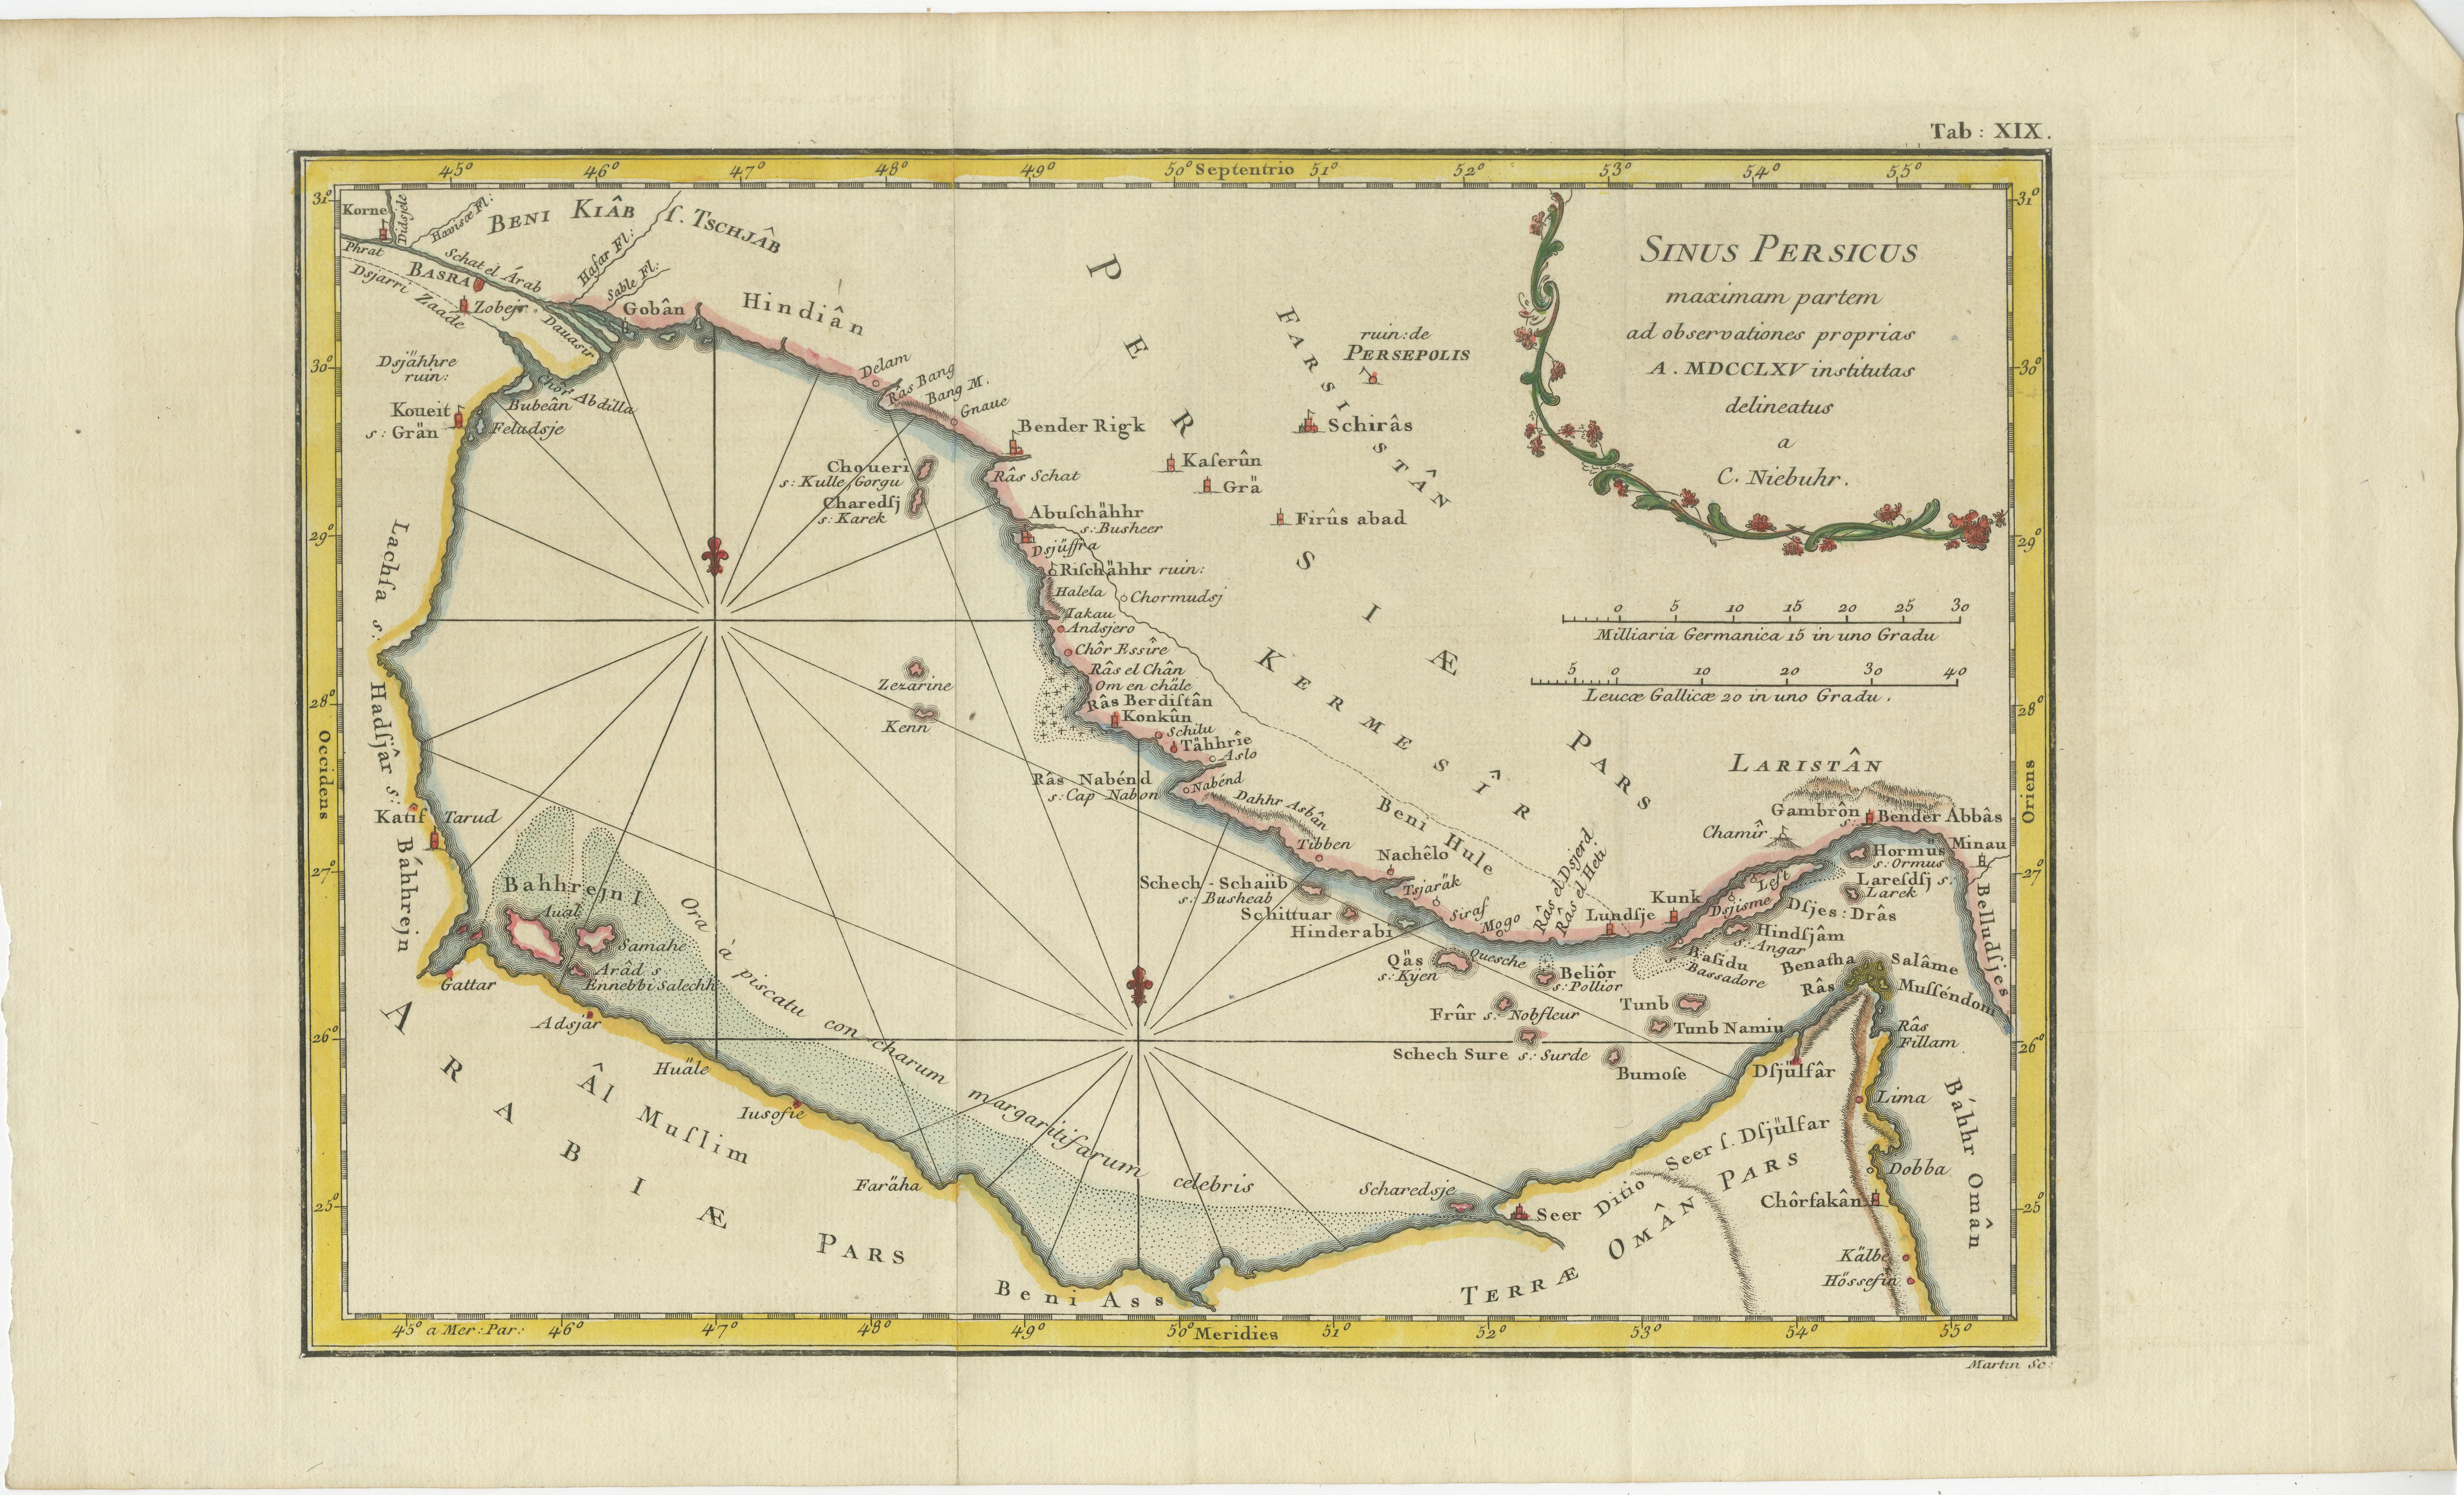 Antique map titled 'Sinus Persicus maximam partem (..)'. An attractive antique map of the Persian Gulf, delicately engraved and charmingly colored. The map stretches from Basra on the Arvand River in the northwest to past the Strait of Hormuz in the